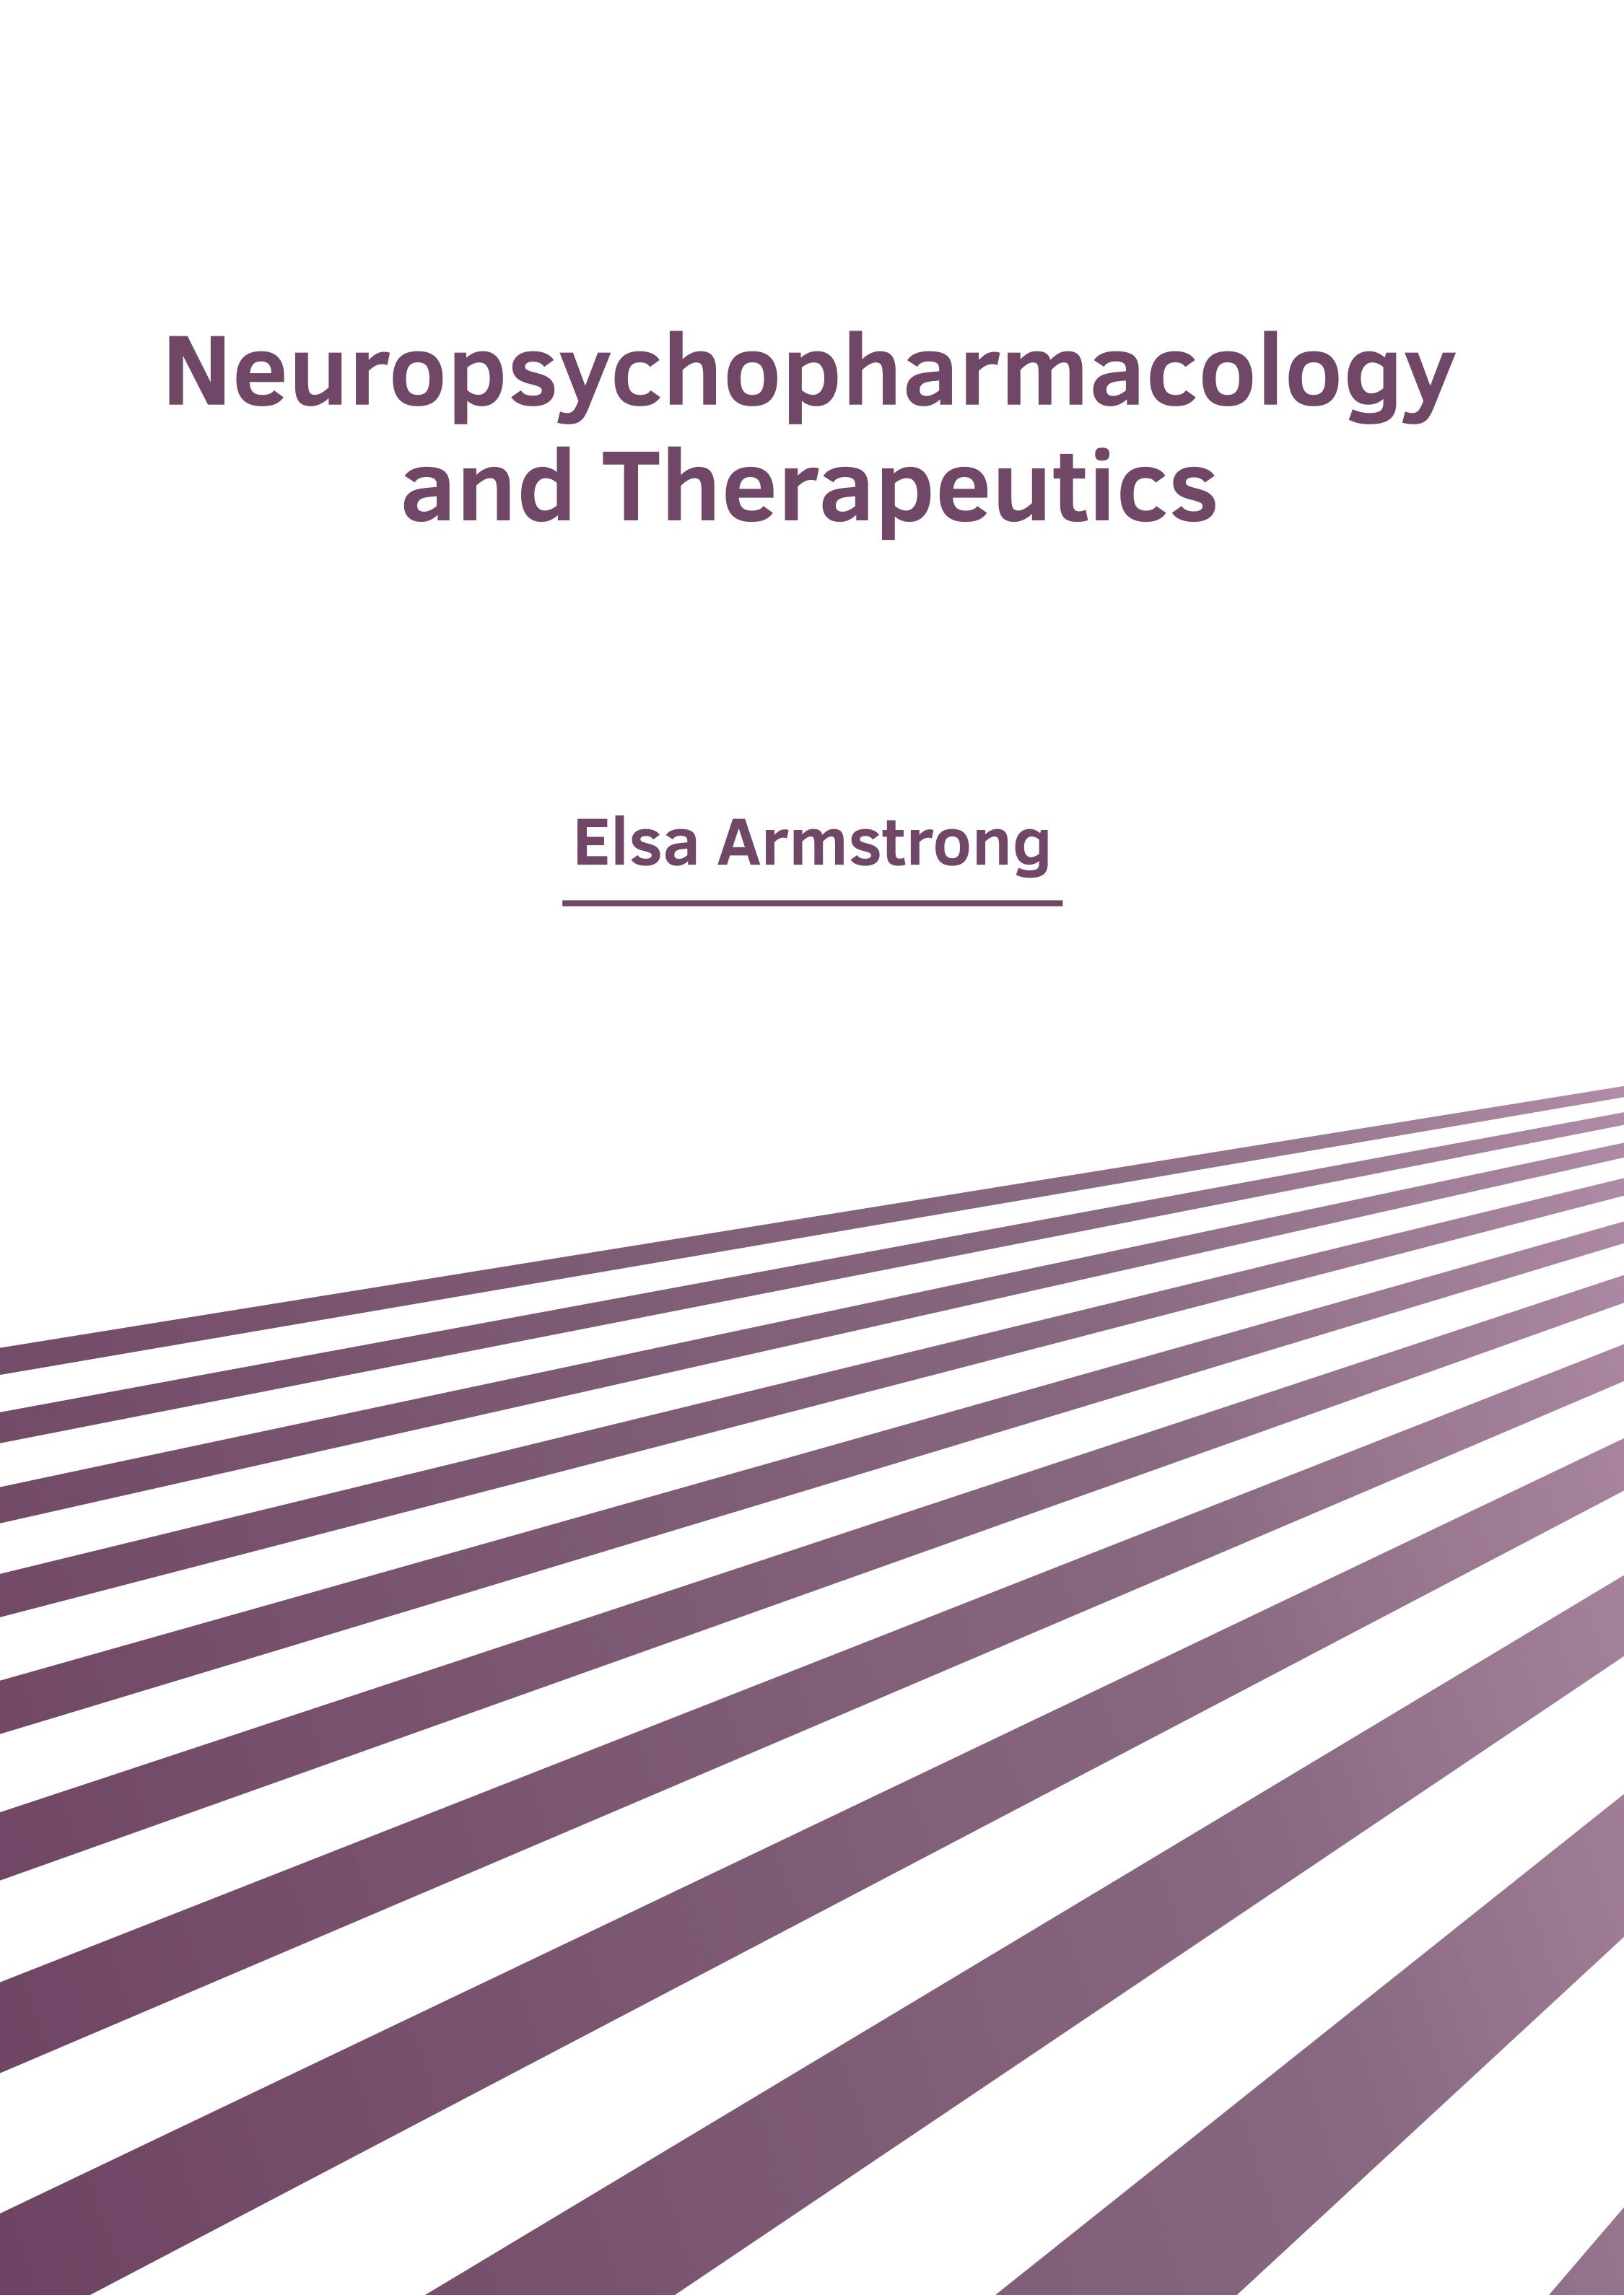 NEUROPSYCHOPHARMACOLOGY AND THERAPEUTICS